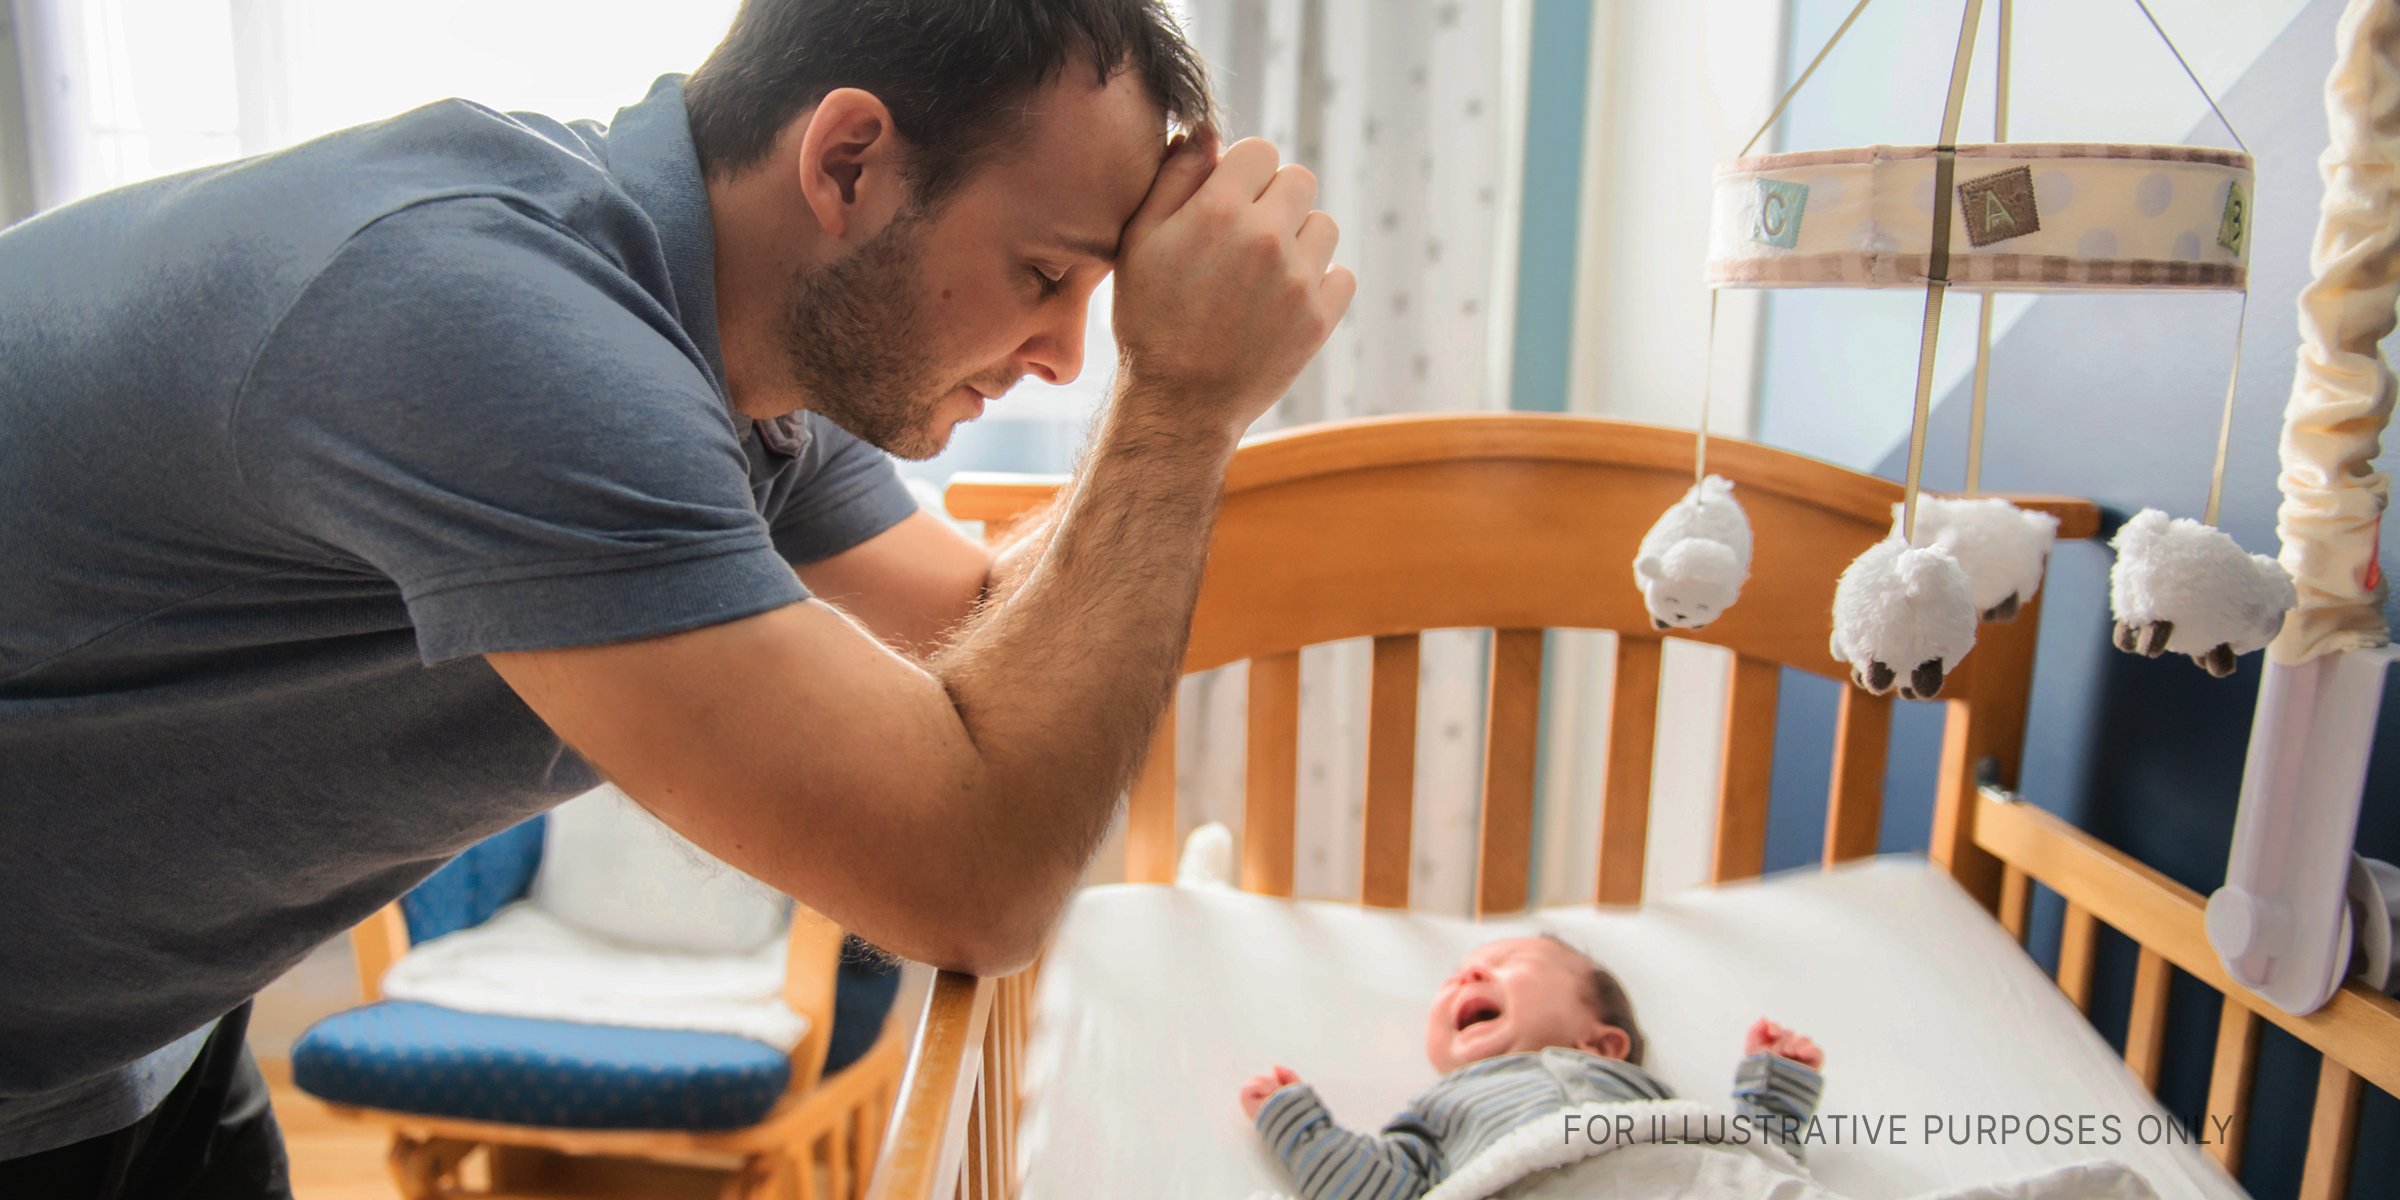 Man overlooking a baby in a crib. | Source: Shutterstock